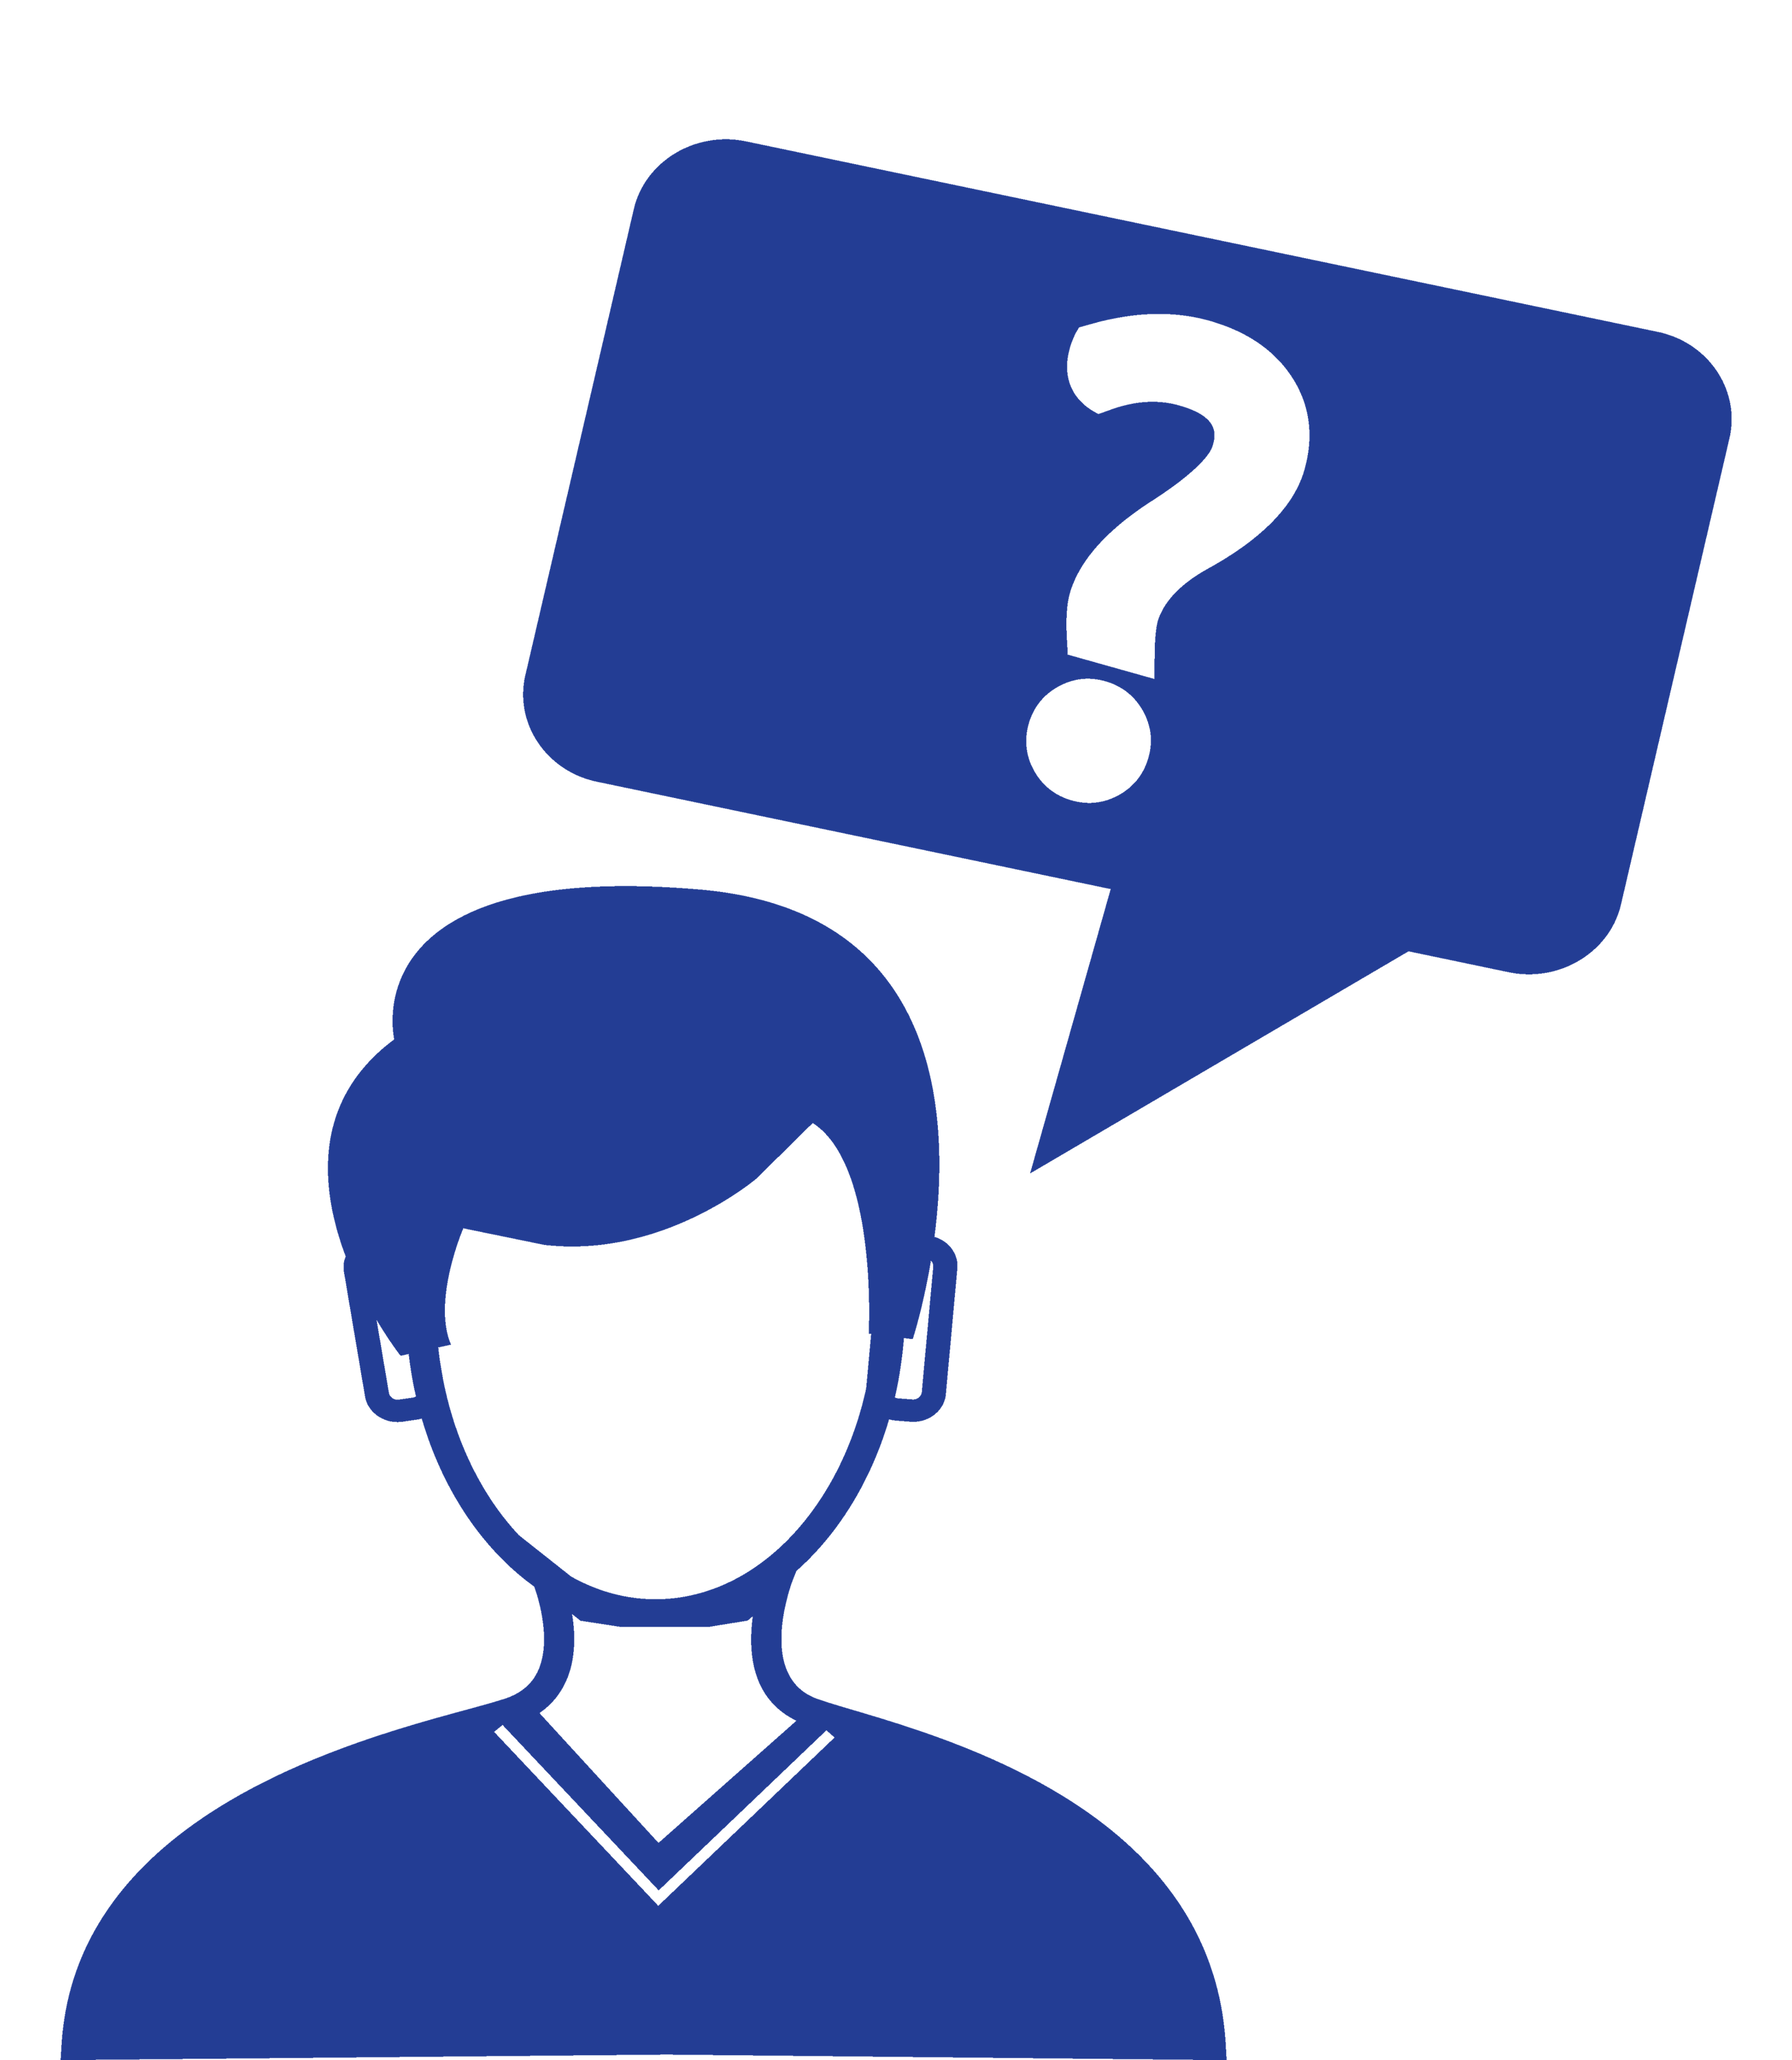 A person with a question bubble as a blue graphic